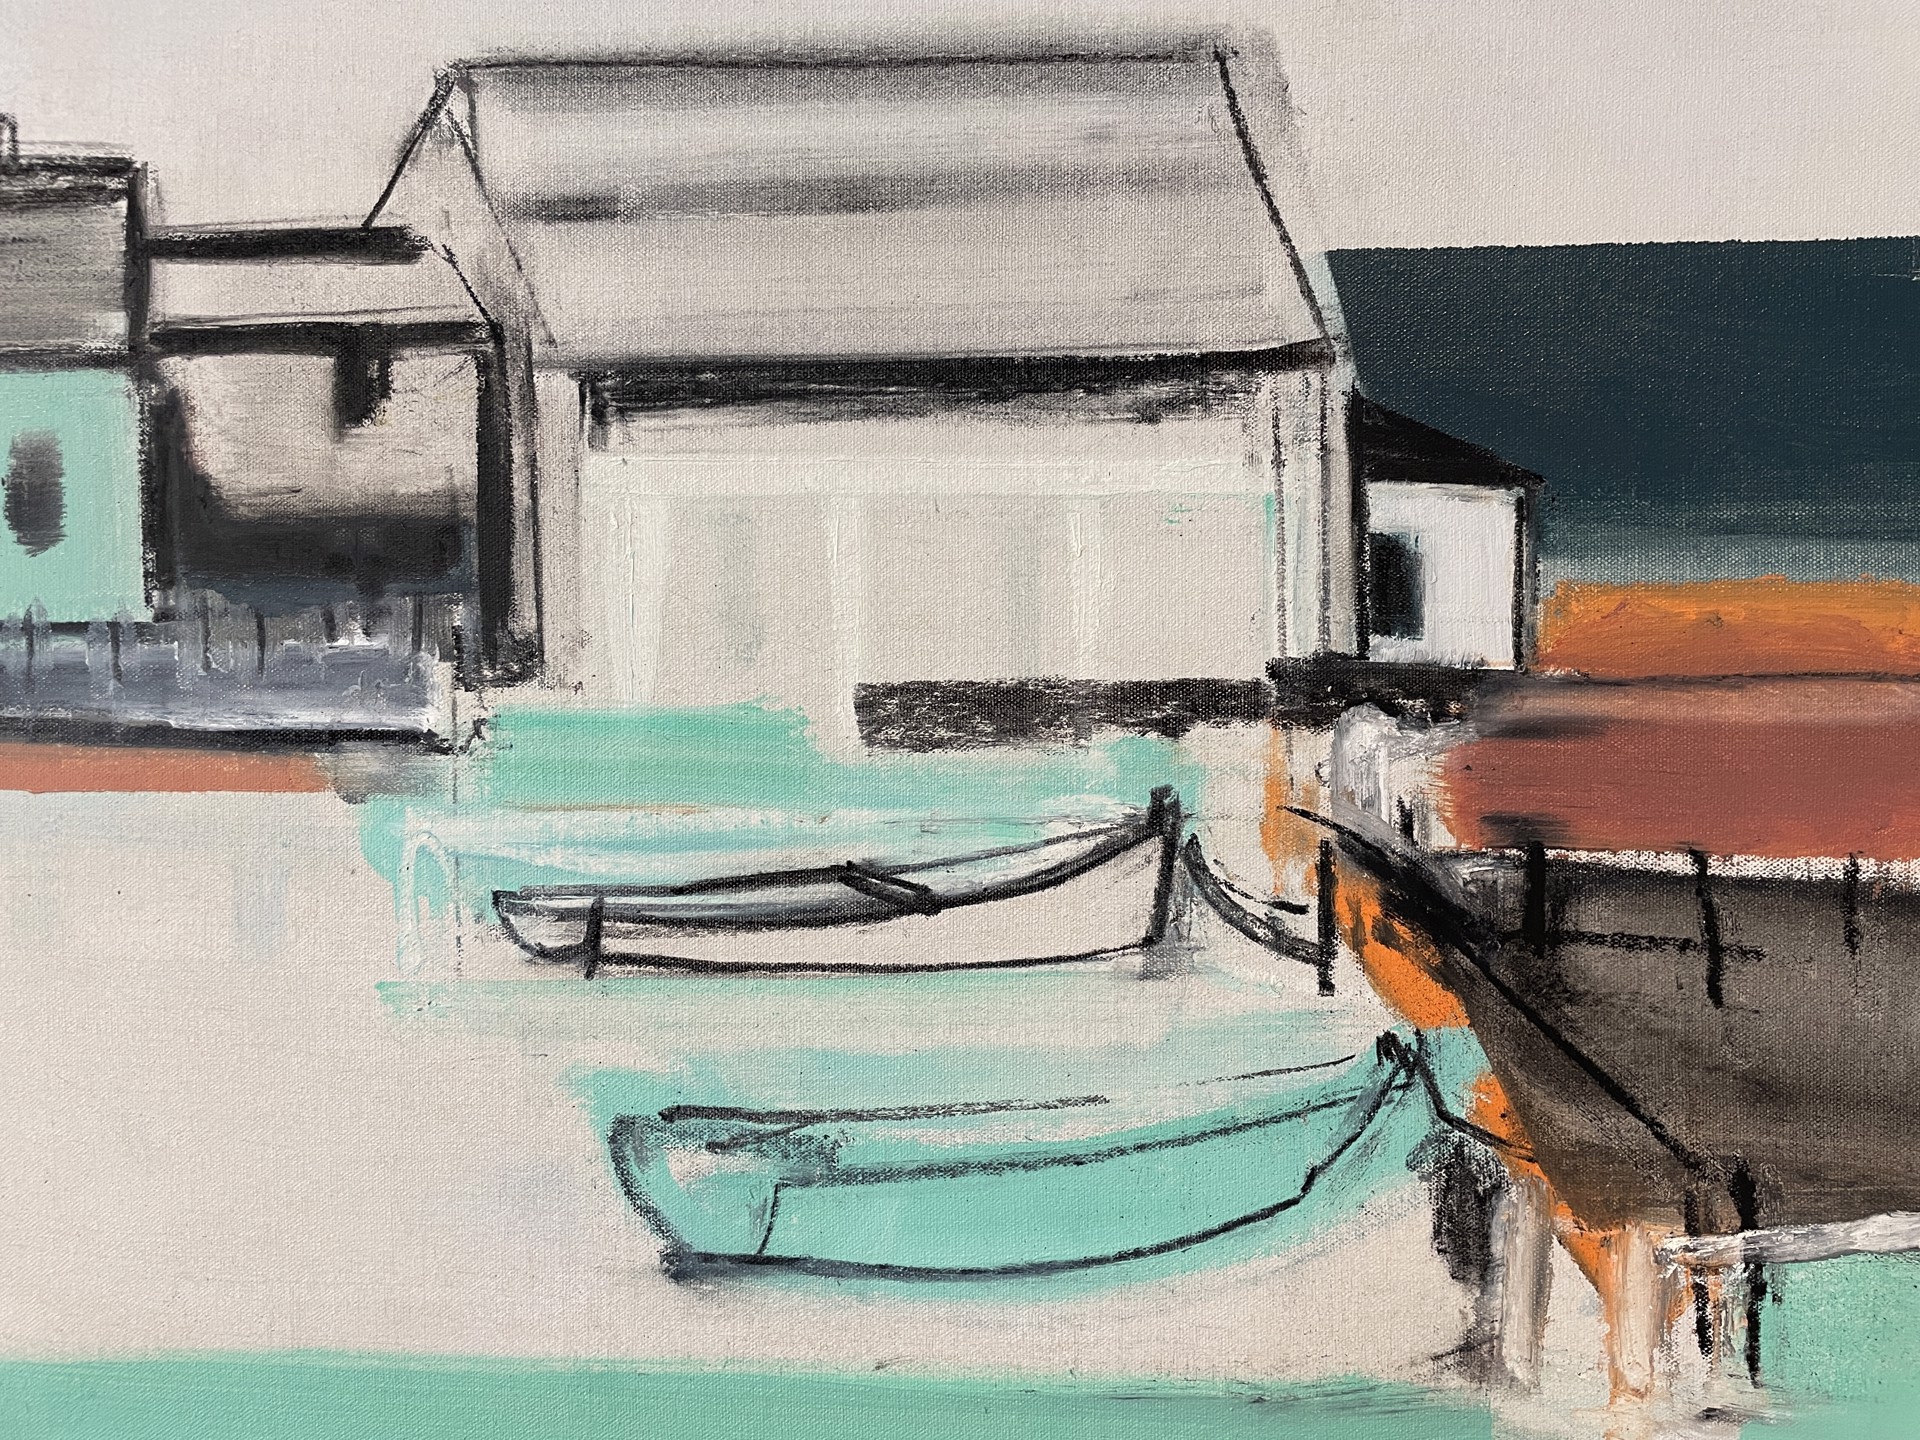 LITTLE BOATS WAITING FOR SOME ACTION by CHRISTINA THWAITES (Landscape)